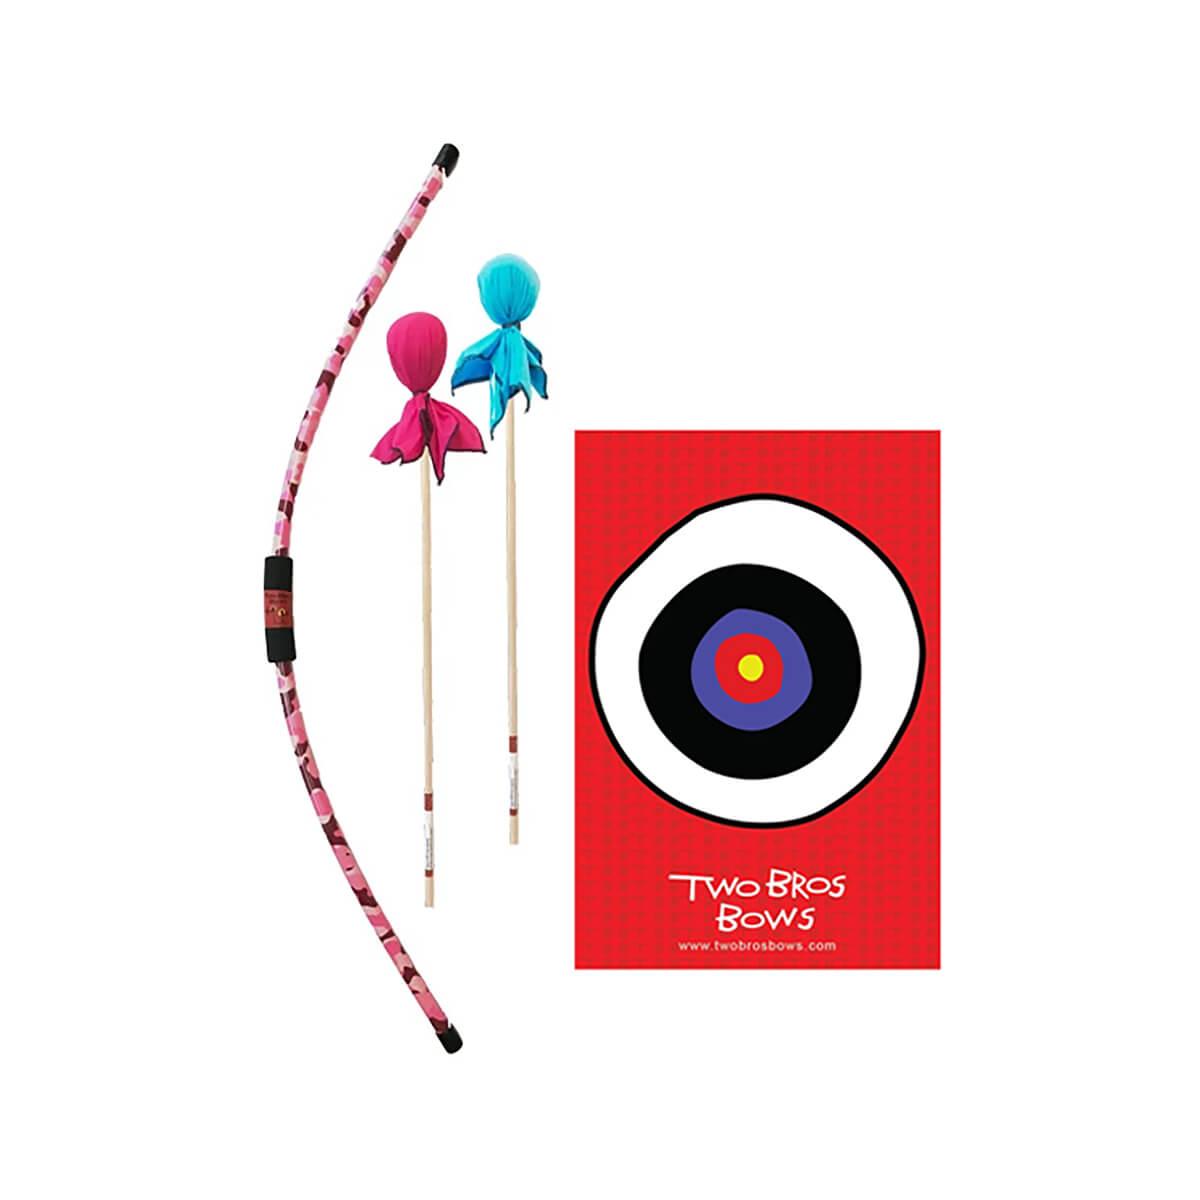 pink bow and arrow for kids